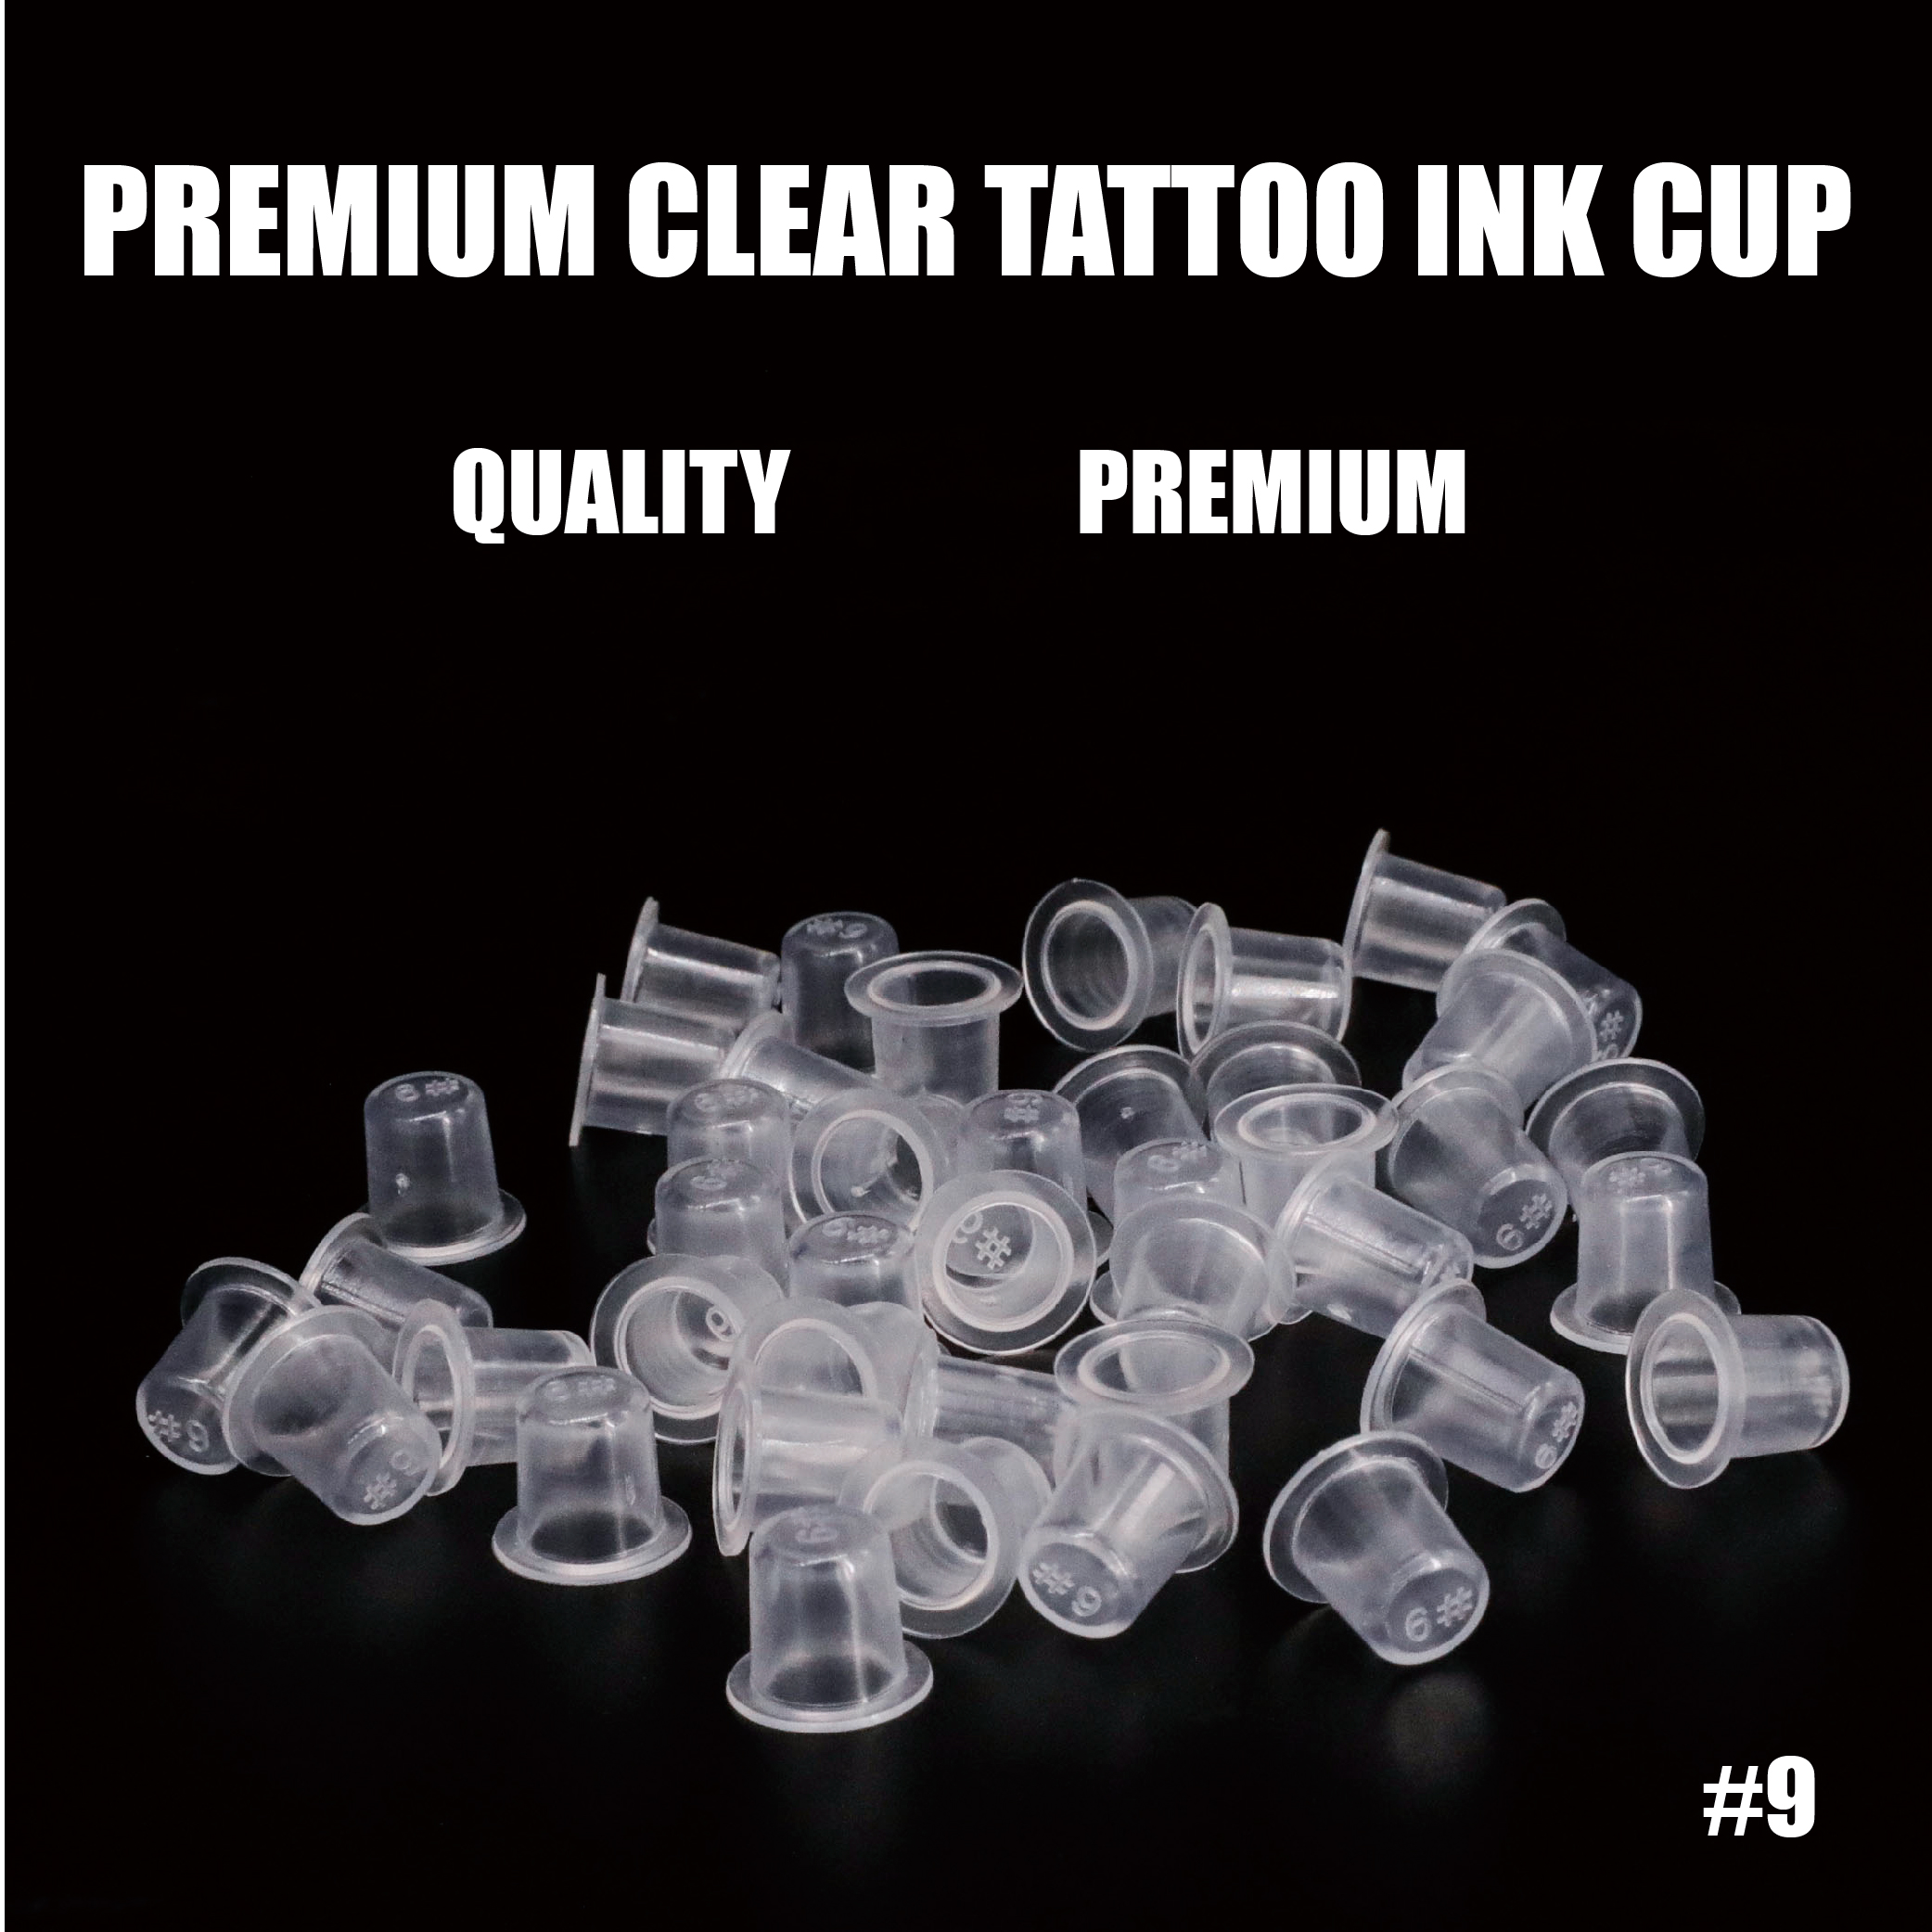 High quality Of AVA New Tattoo Ink Cup #9